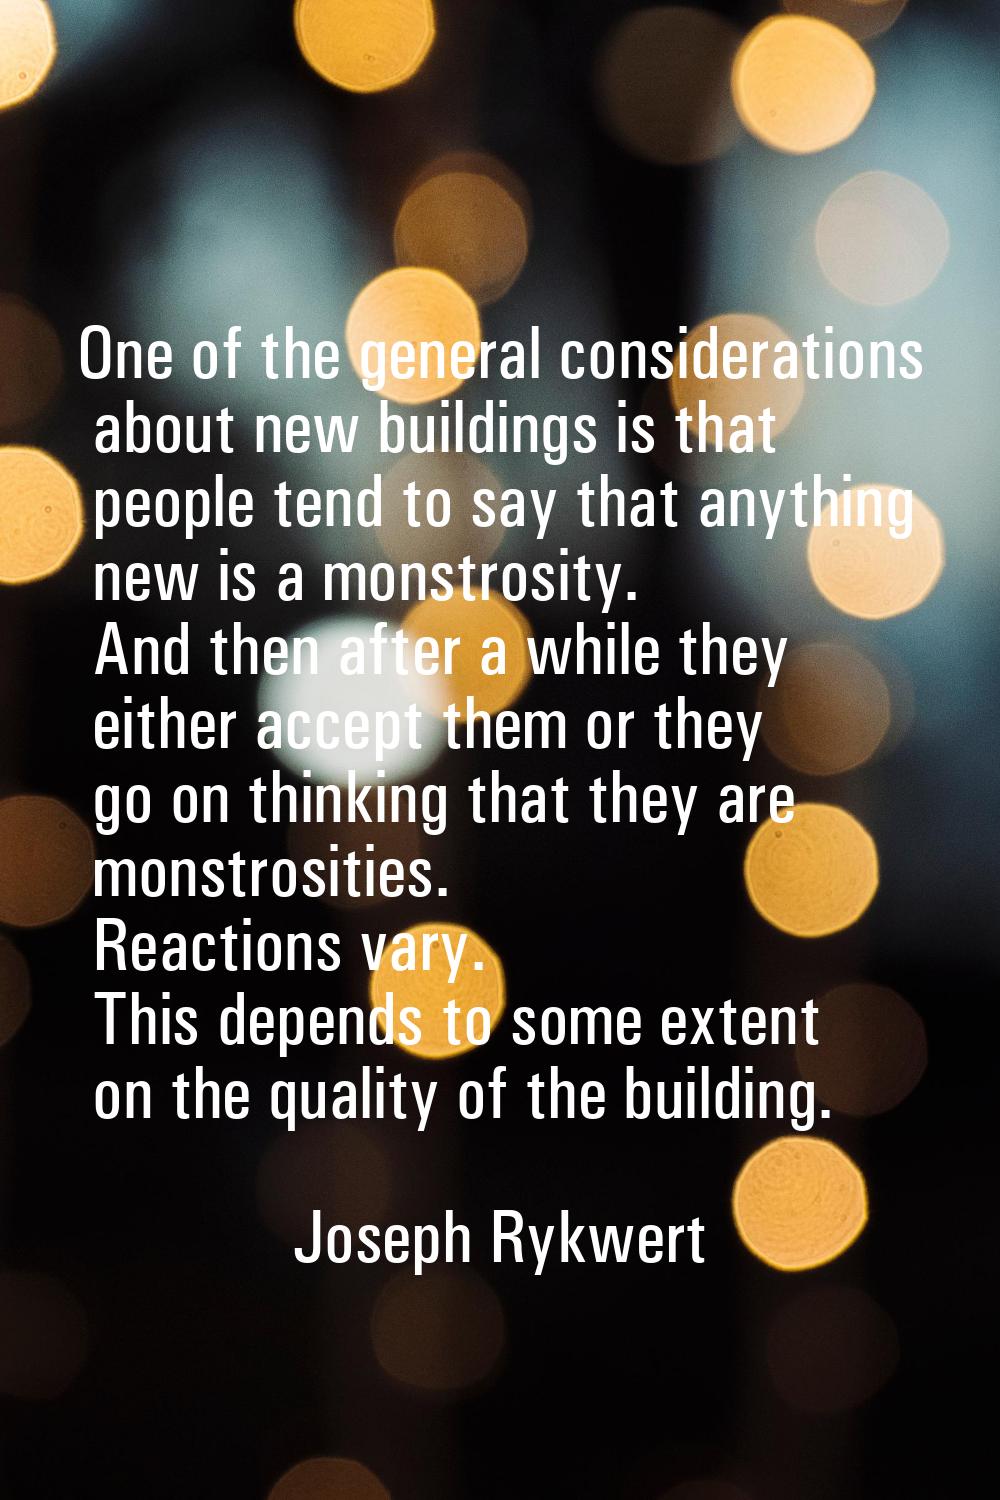 One of the general considerations about new buildings is that people tend to say that anything new 